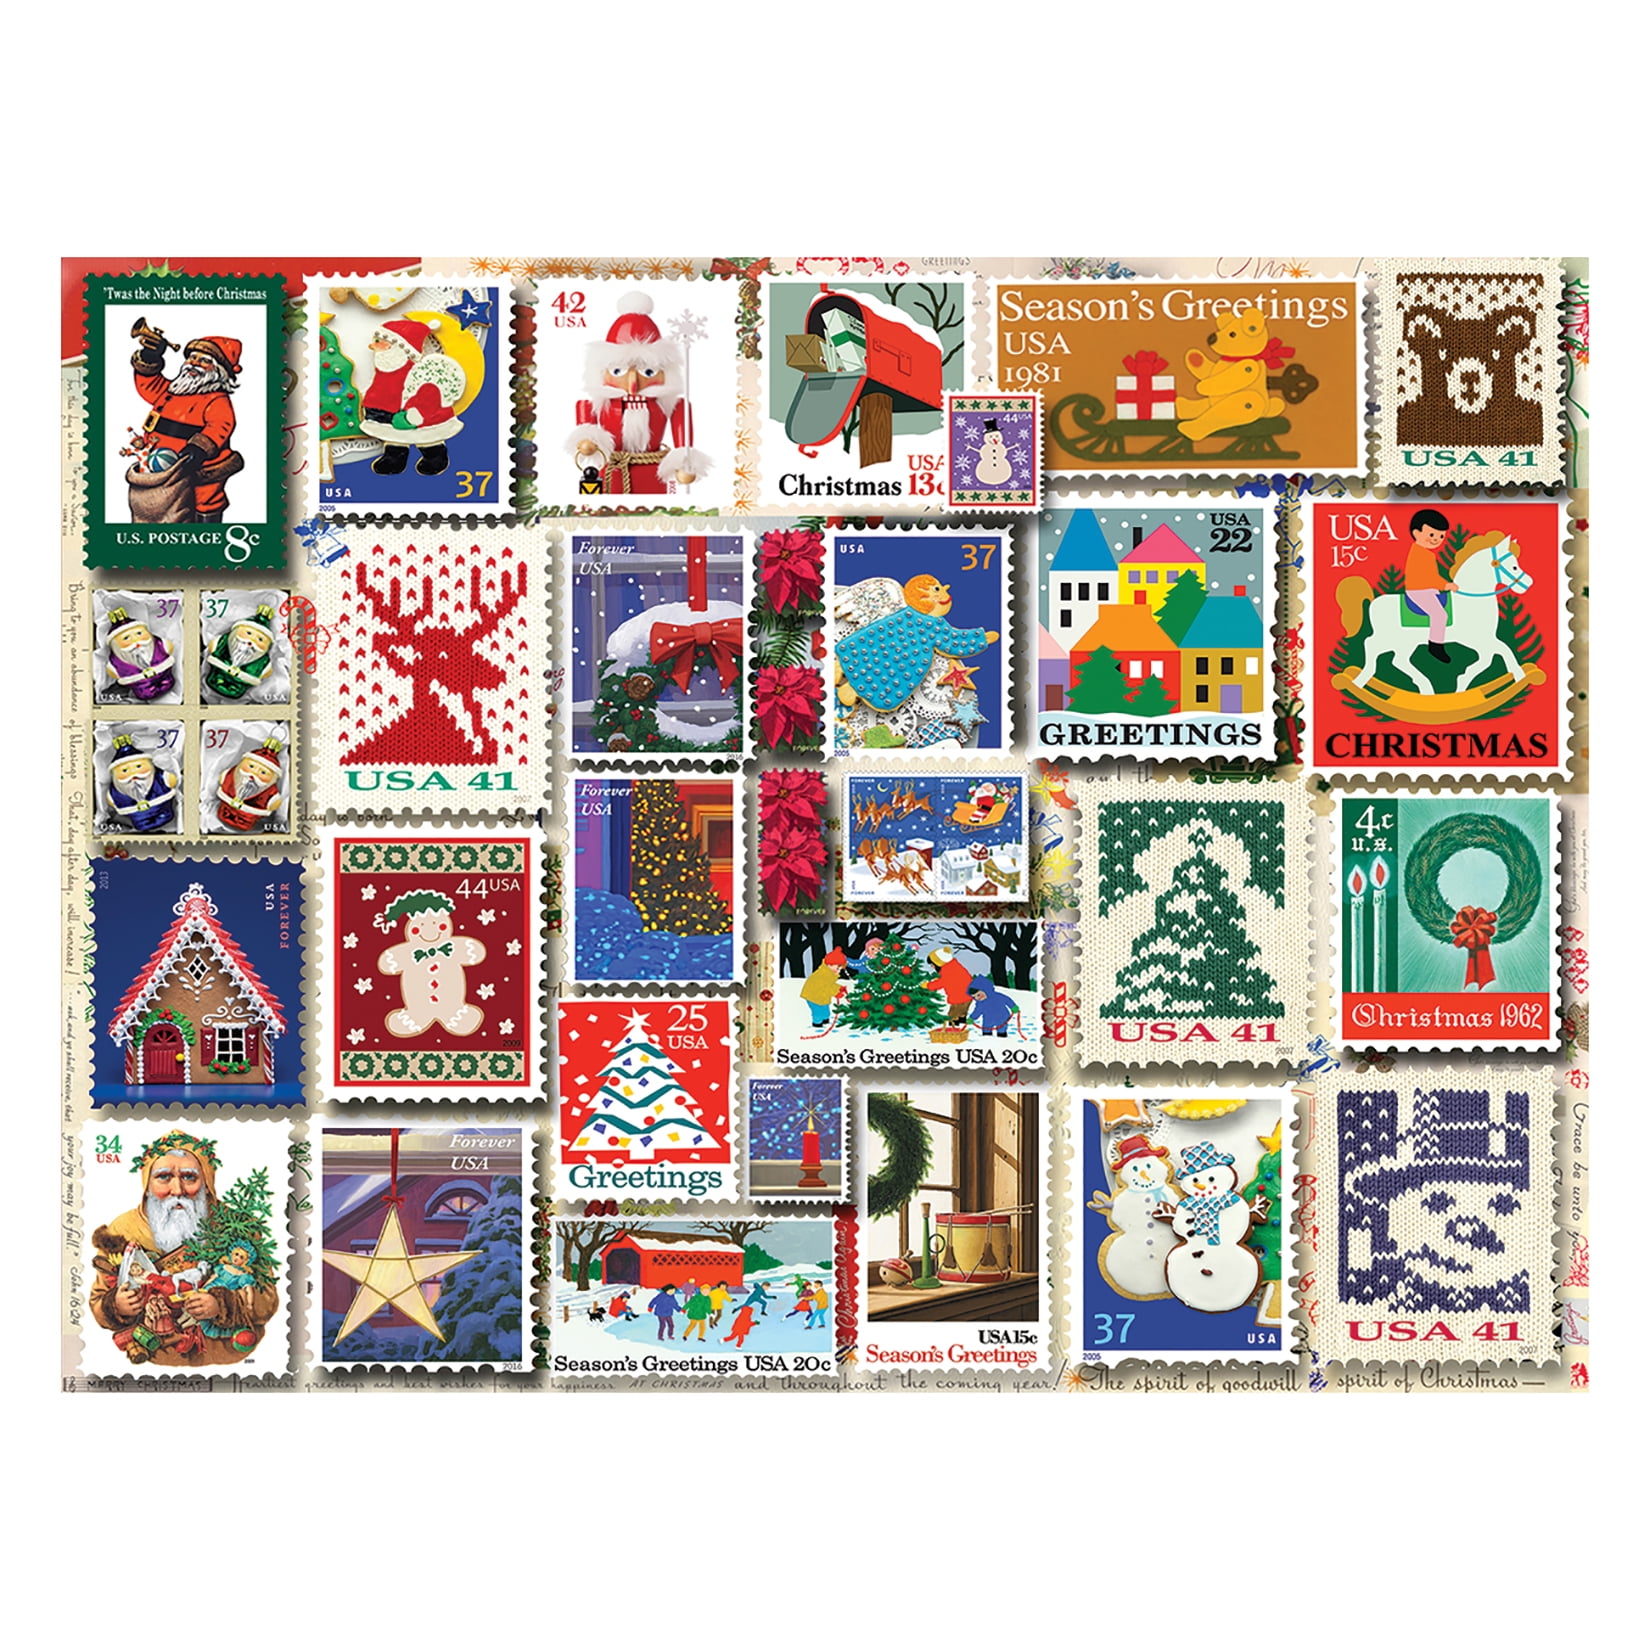 1997 USPS STAMPS Holiday Traditions Hallmark Ensemble 500 Pcs Jigsaw Puzzle for sale online 